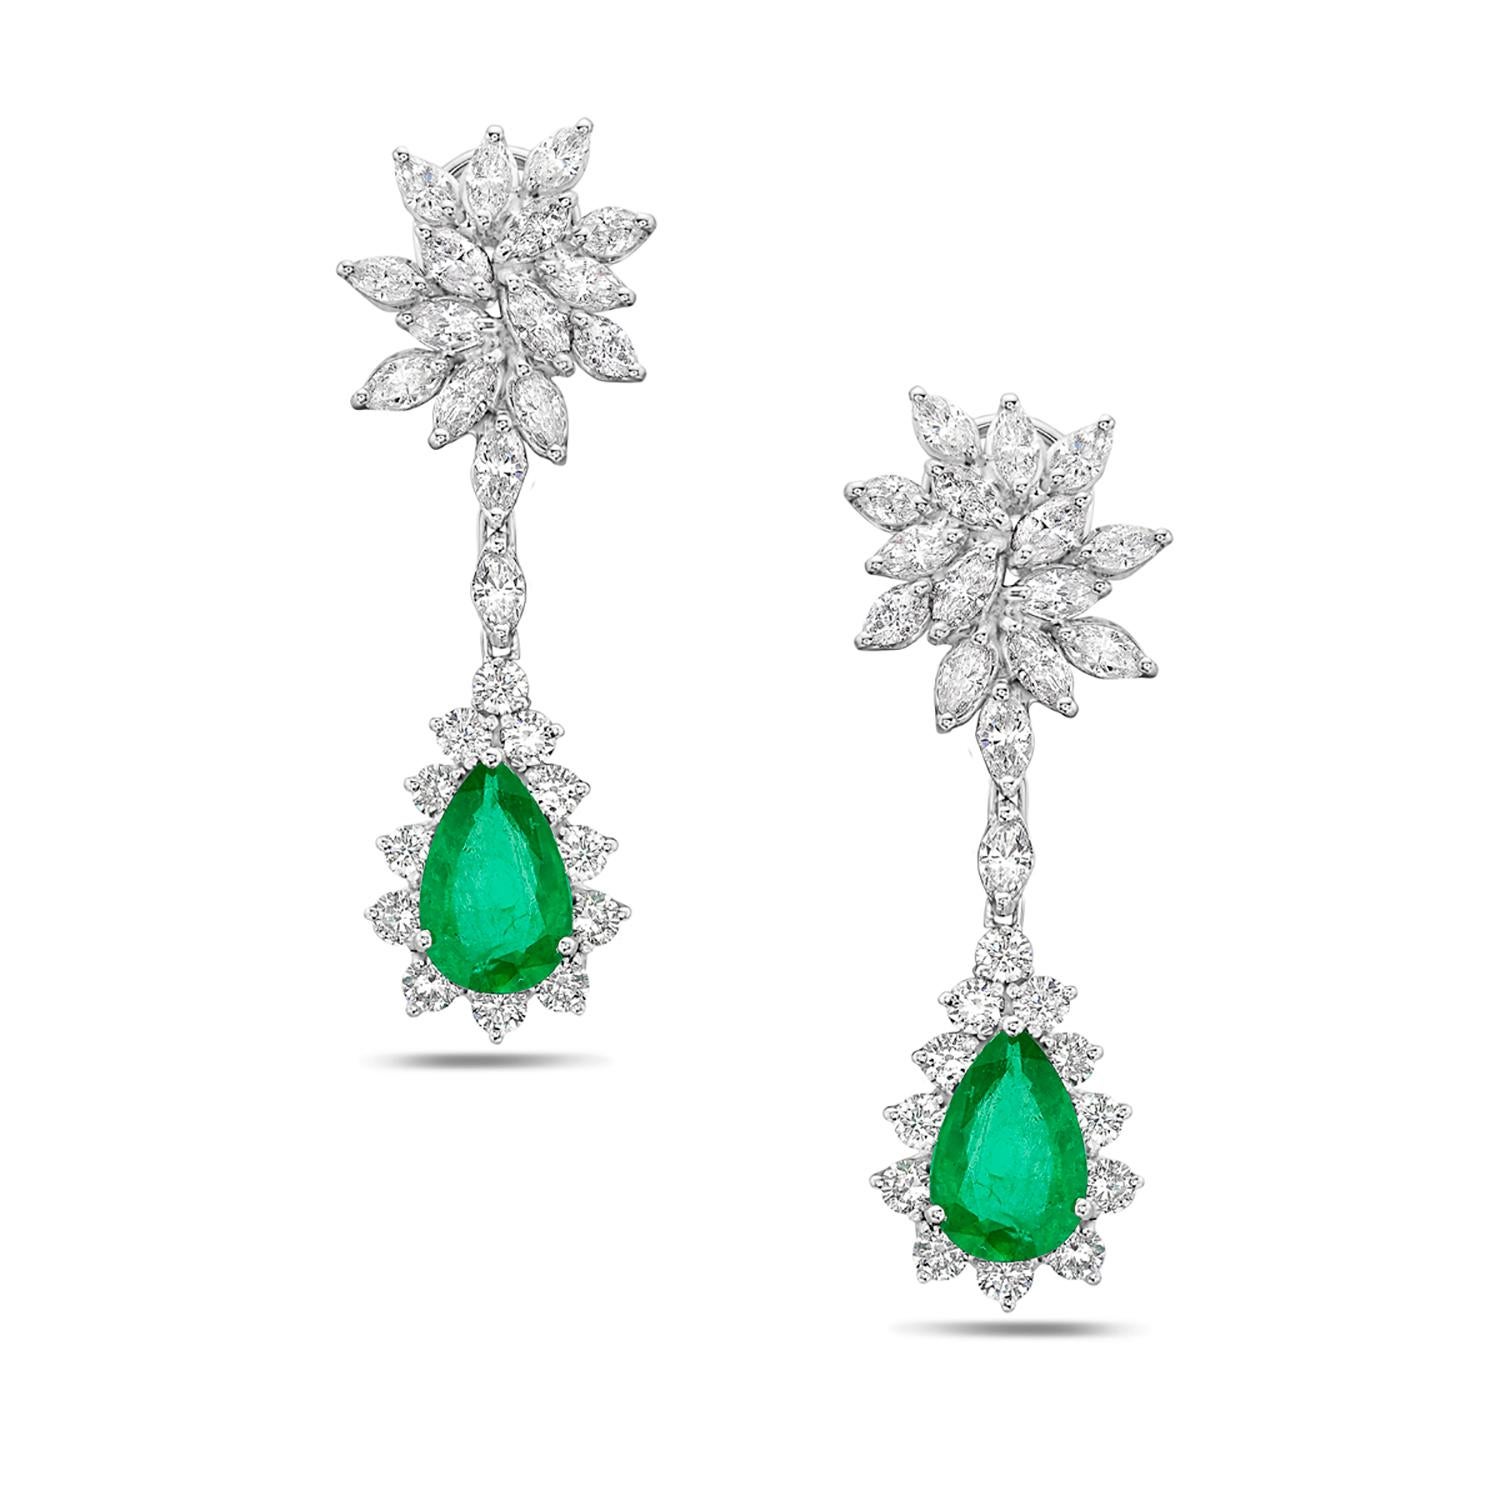 Starburst Earrings with Pear Shaped Emerald & VS Diamonds in 18k White Gold In New Condition For Sale In New York, NY